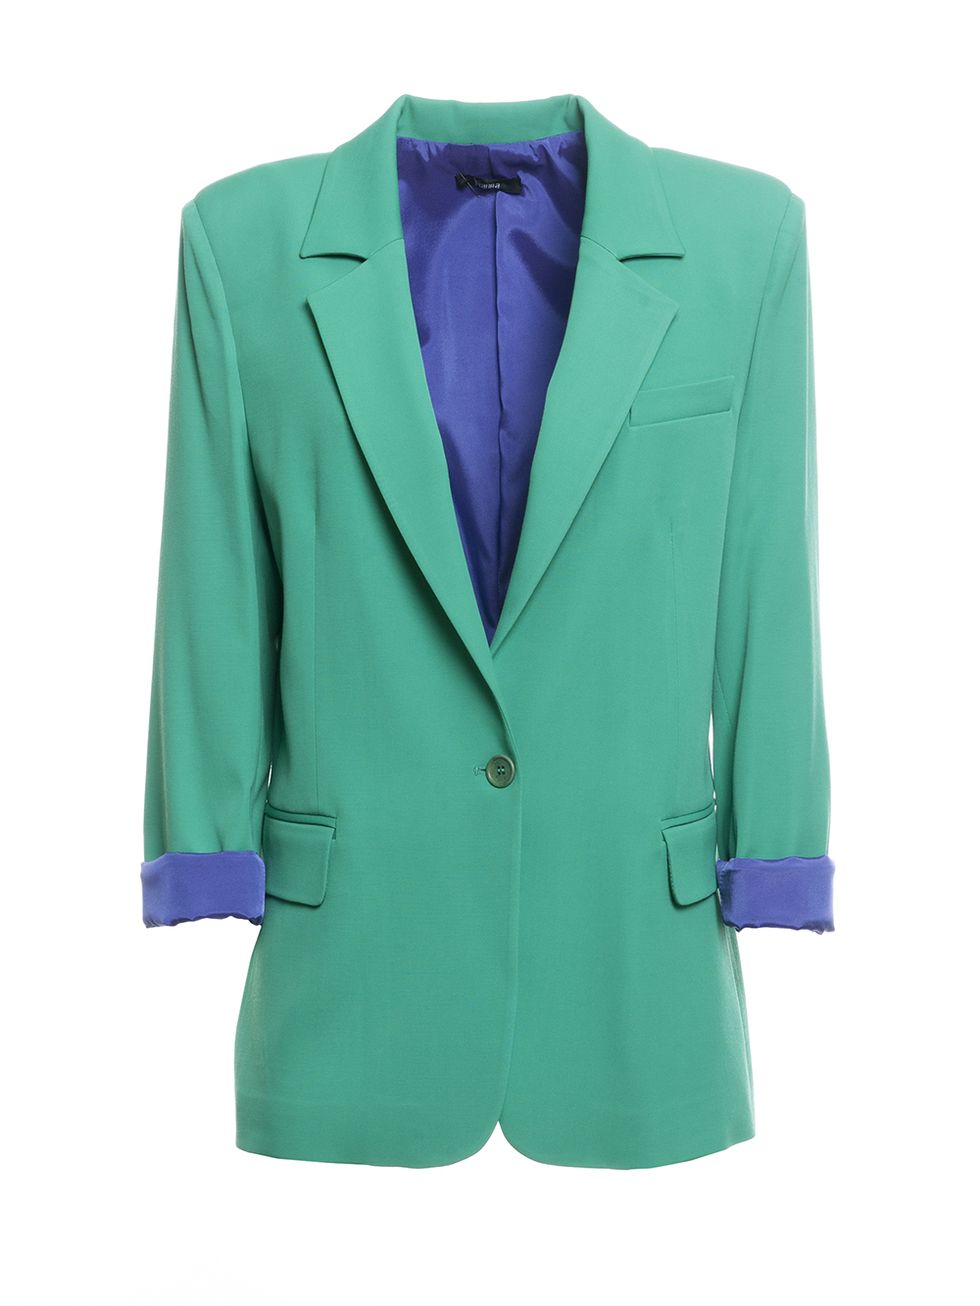 Clothing, Outerwear, Blazer, Jacket, Suit, Green, Turquoise, Formal wear, Sleeve, Button, 